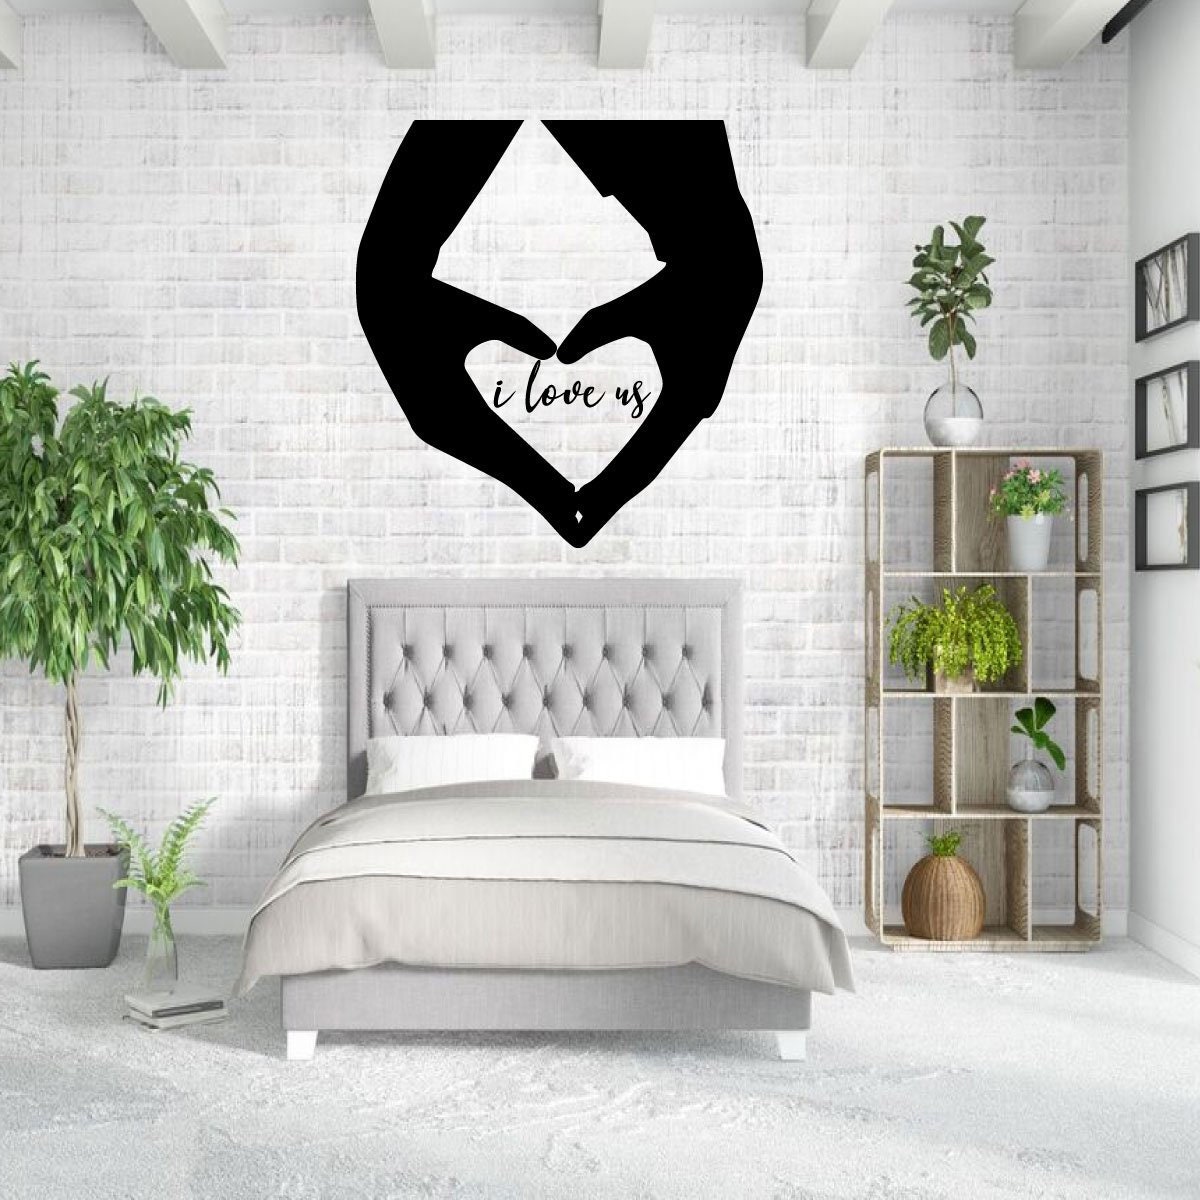 I Love Us Decal - Etsy